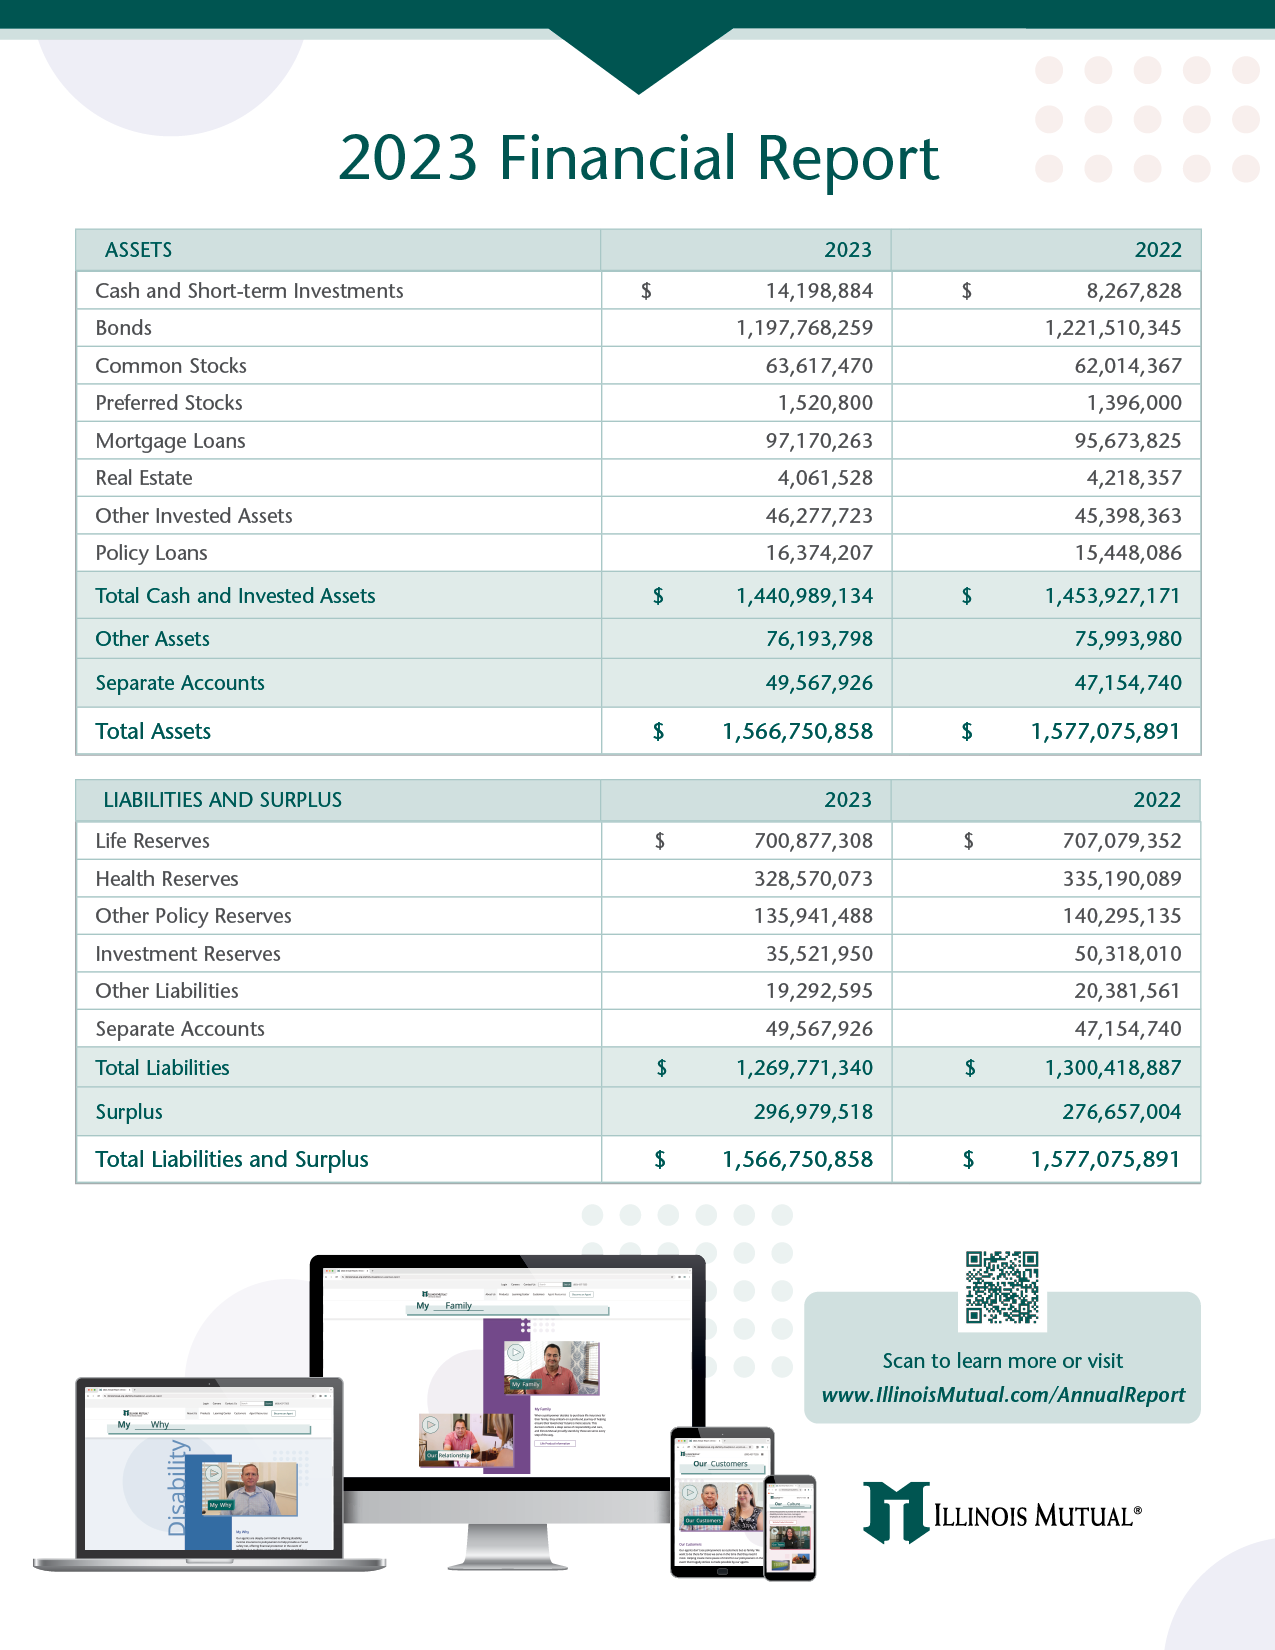 Thumbnail of the financial report